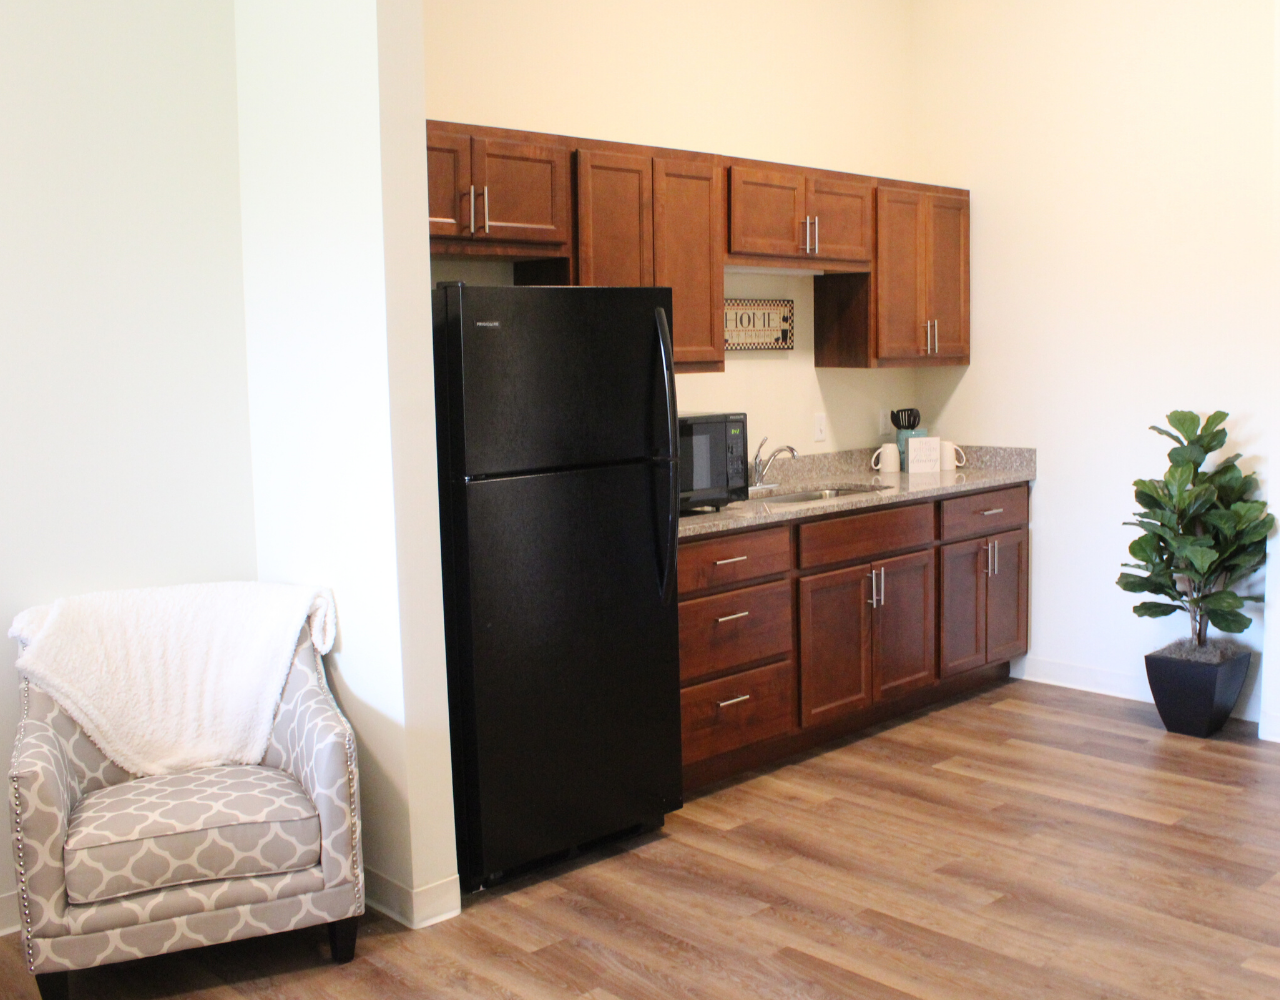 Assisted living kitchen at Silver Birch of Evansville